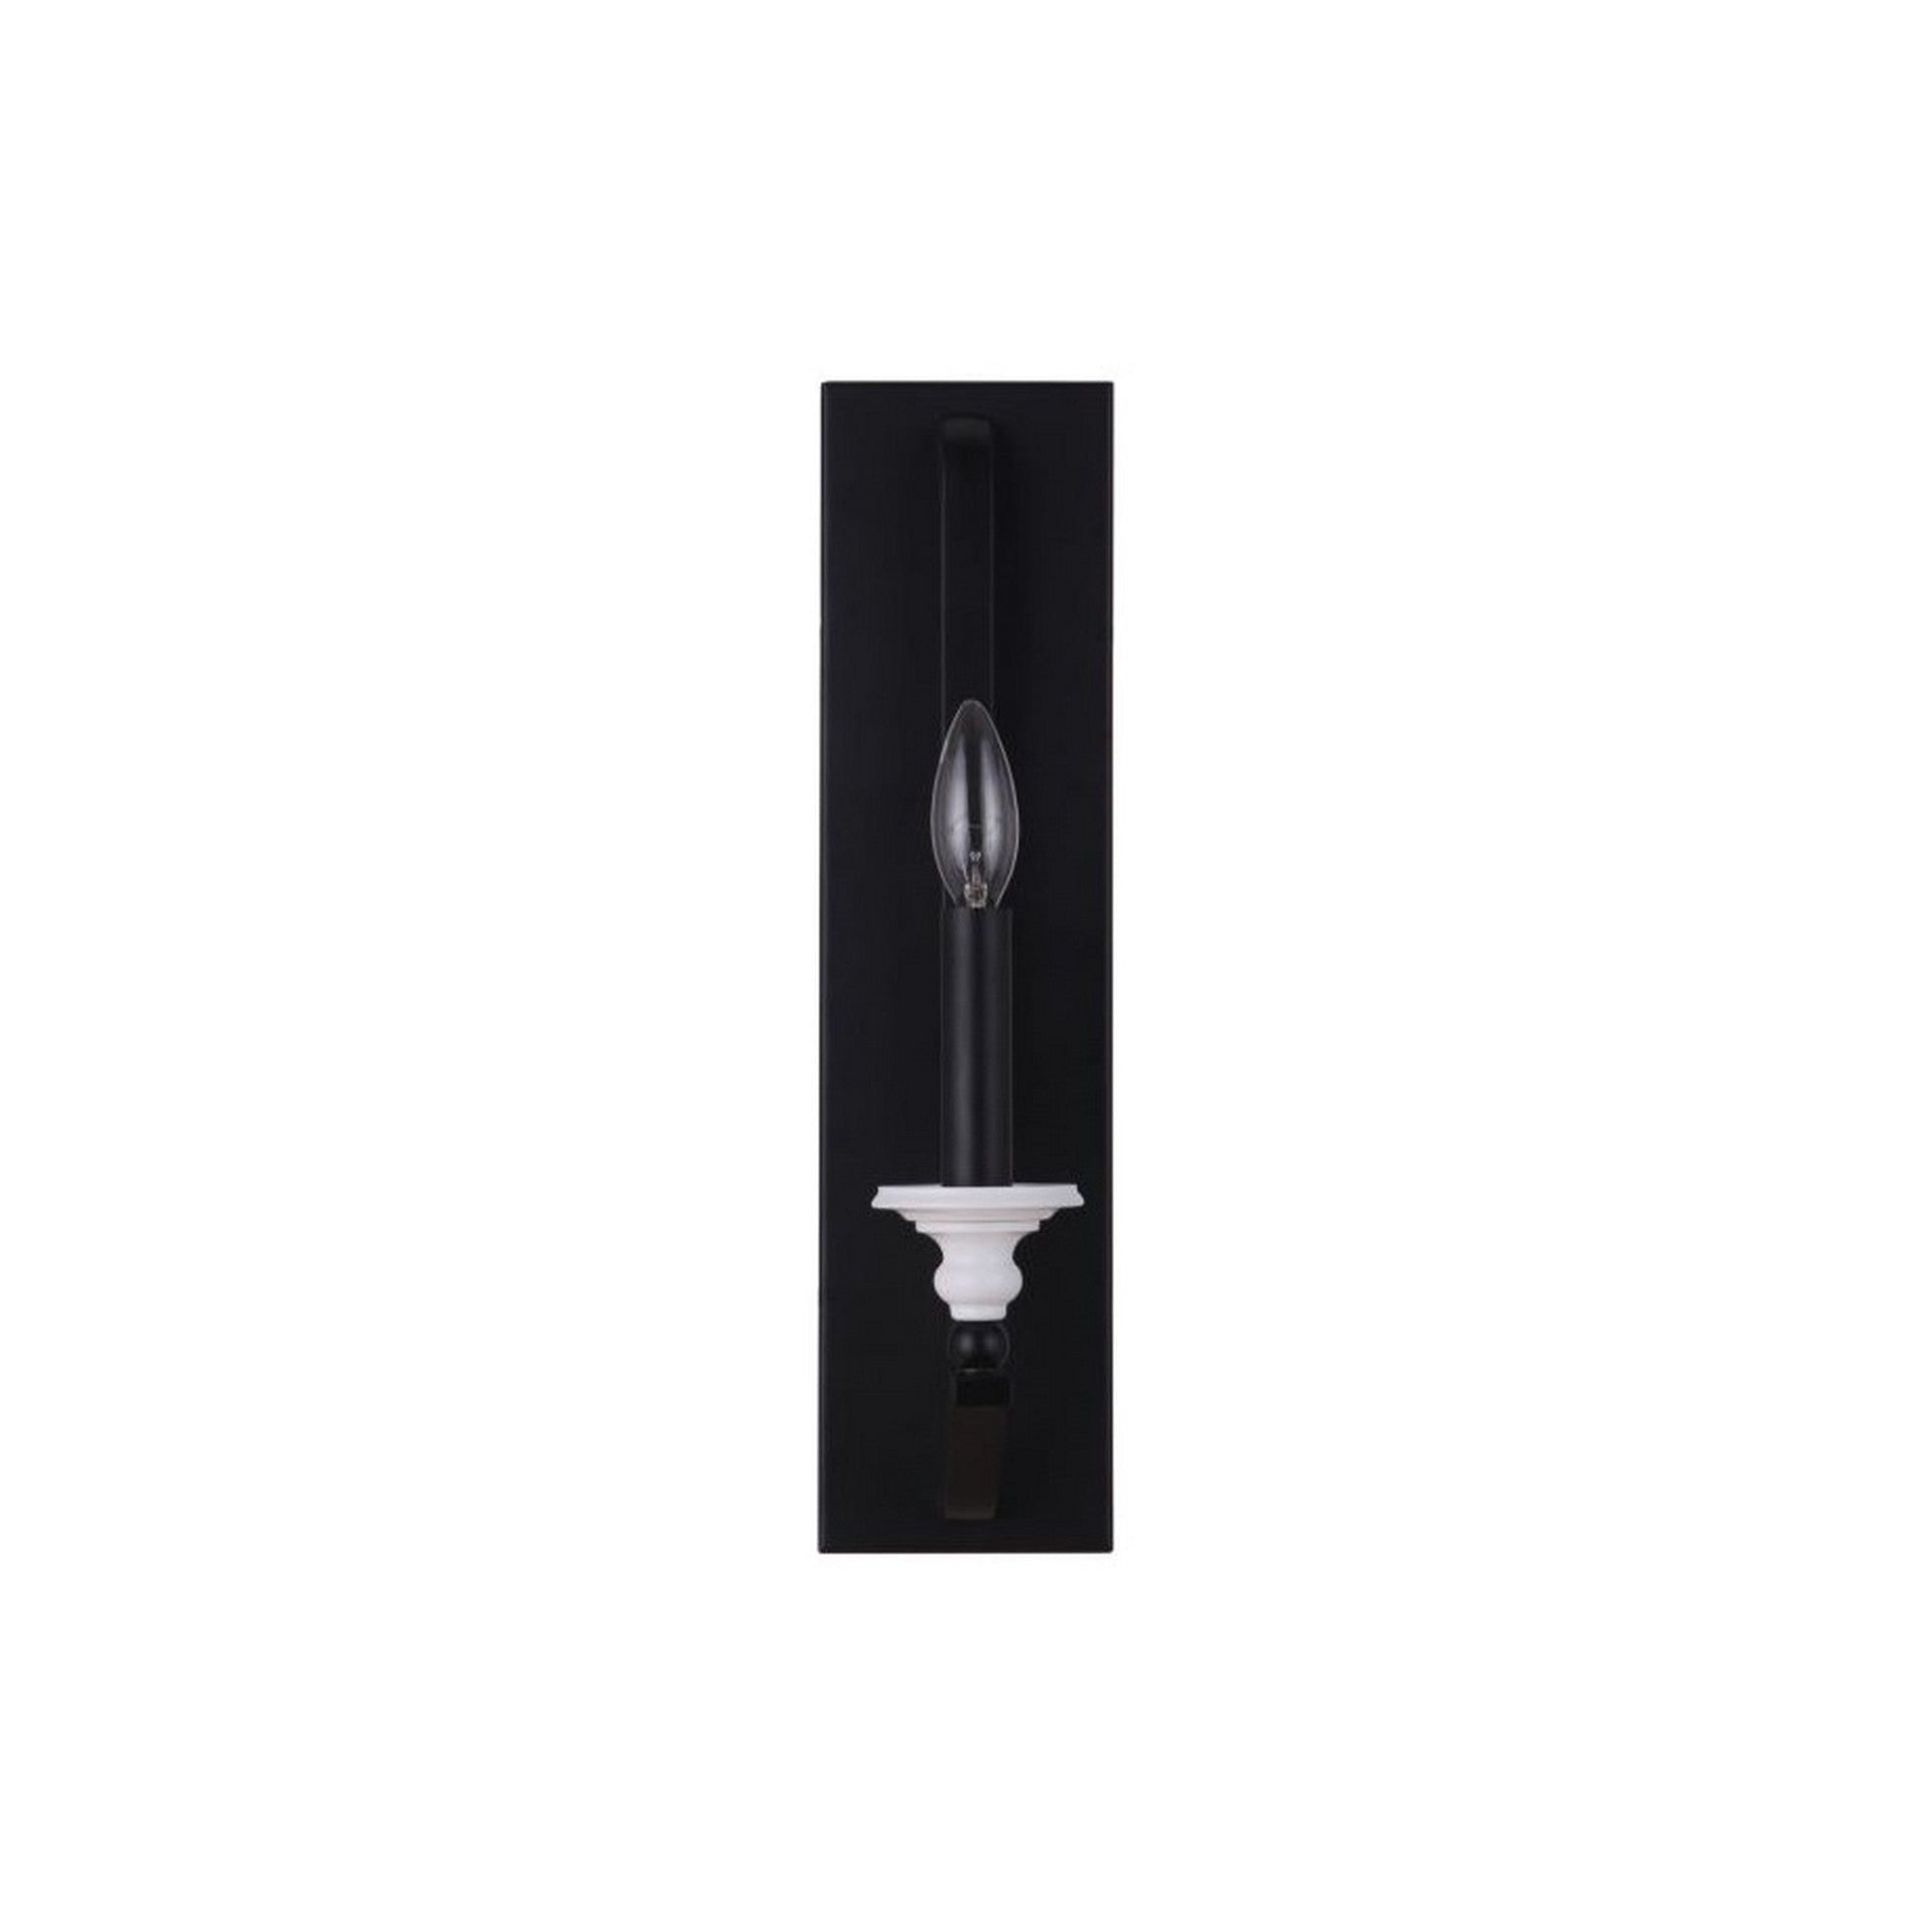 Craftmade Esme 5" x 18" 1-Light Flat Black and Matte White Candle-Style Wall Sconce